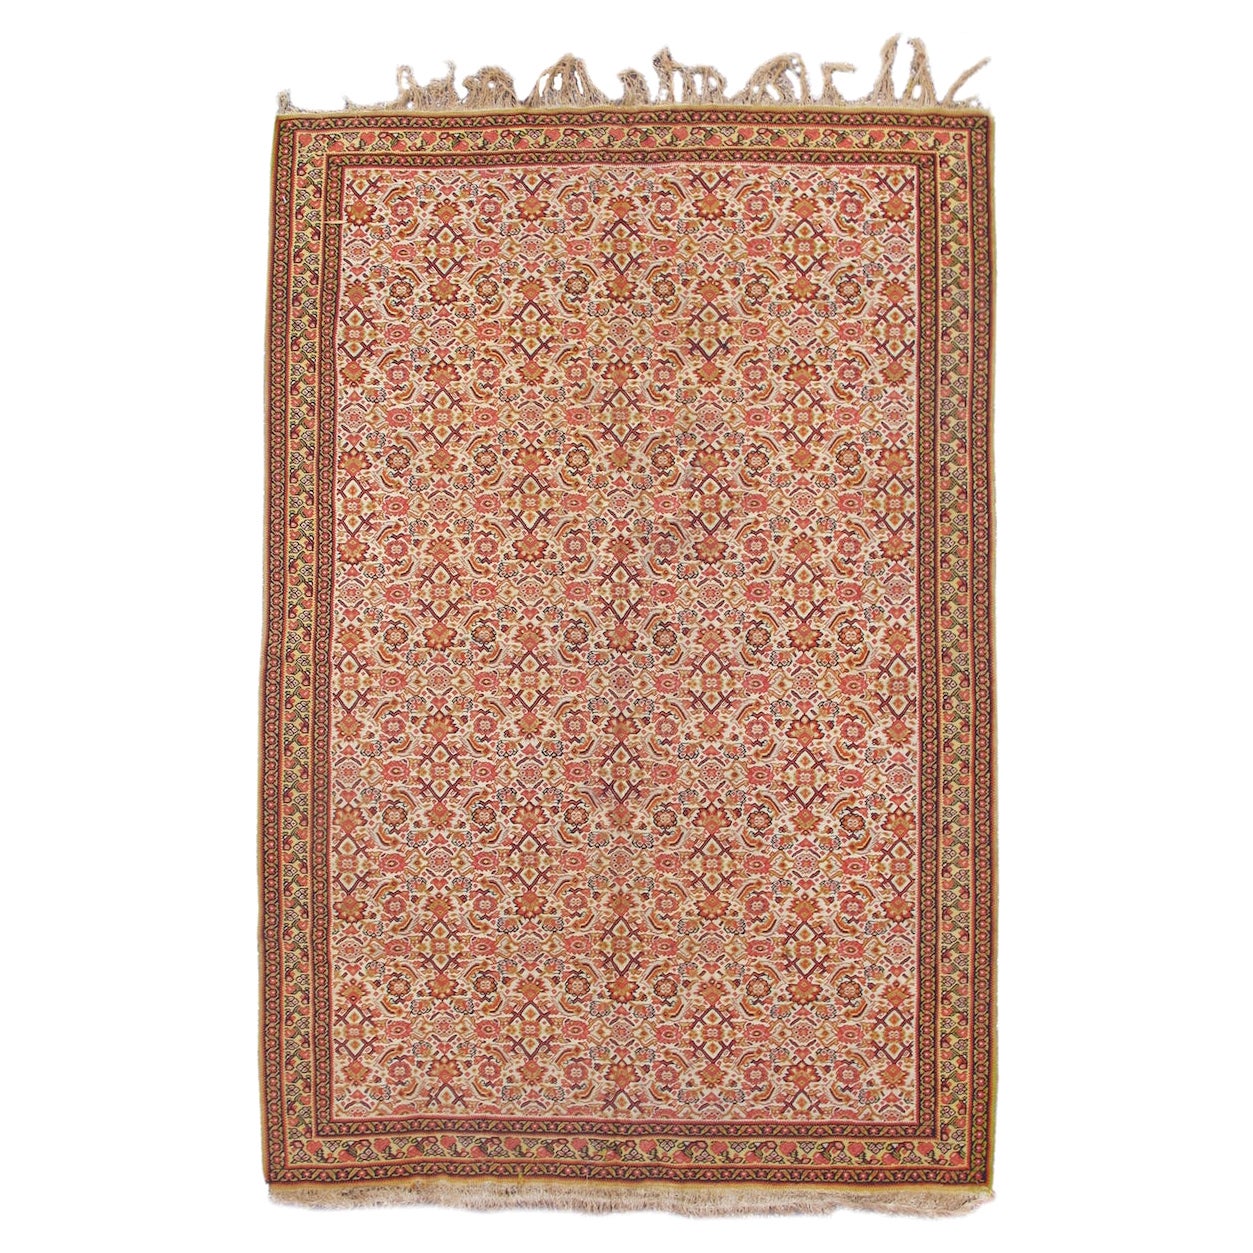 Antique Persian Senneh Kilim Rug, Late 19th Century For Sale